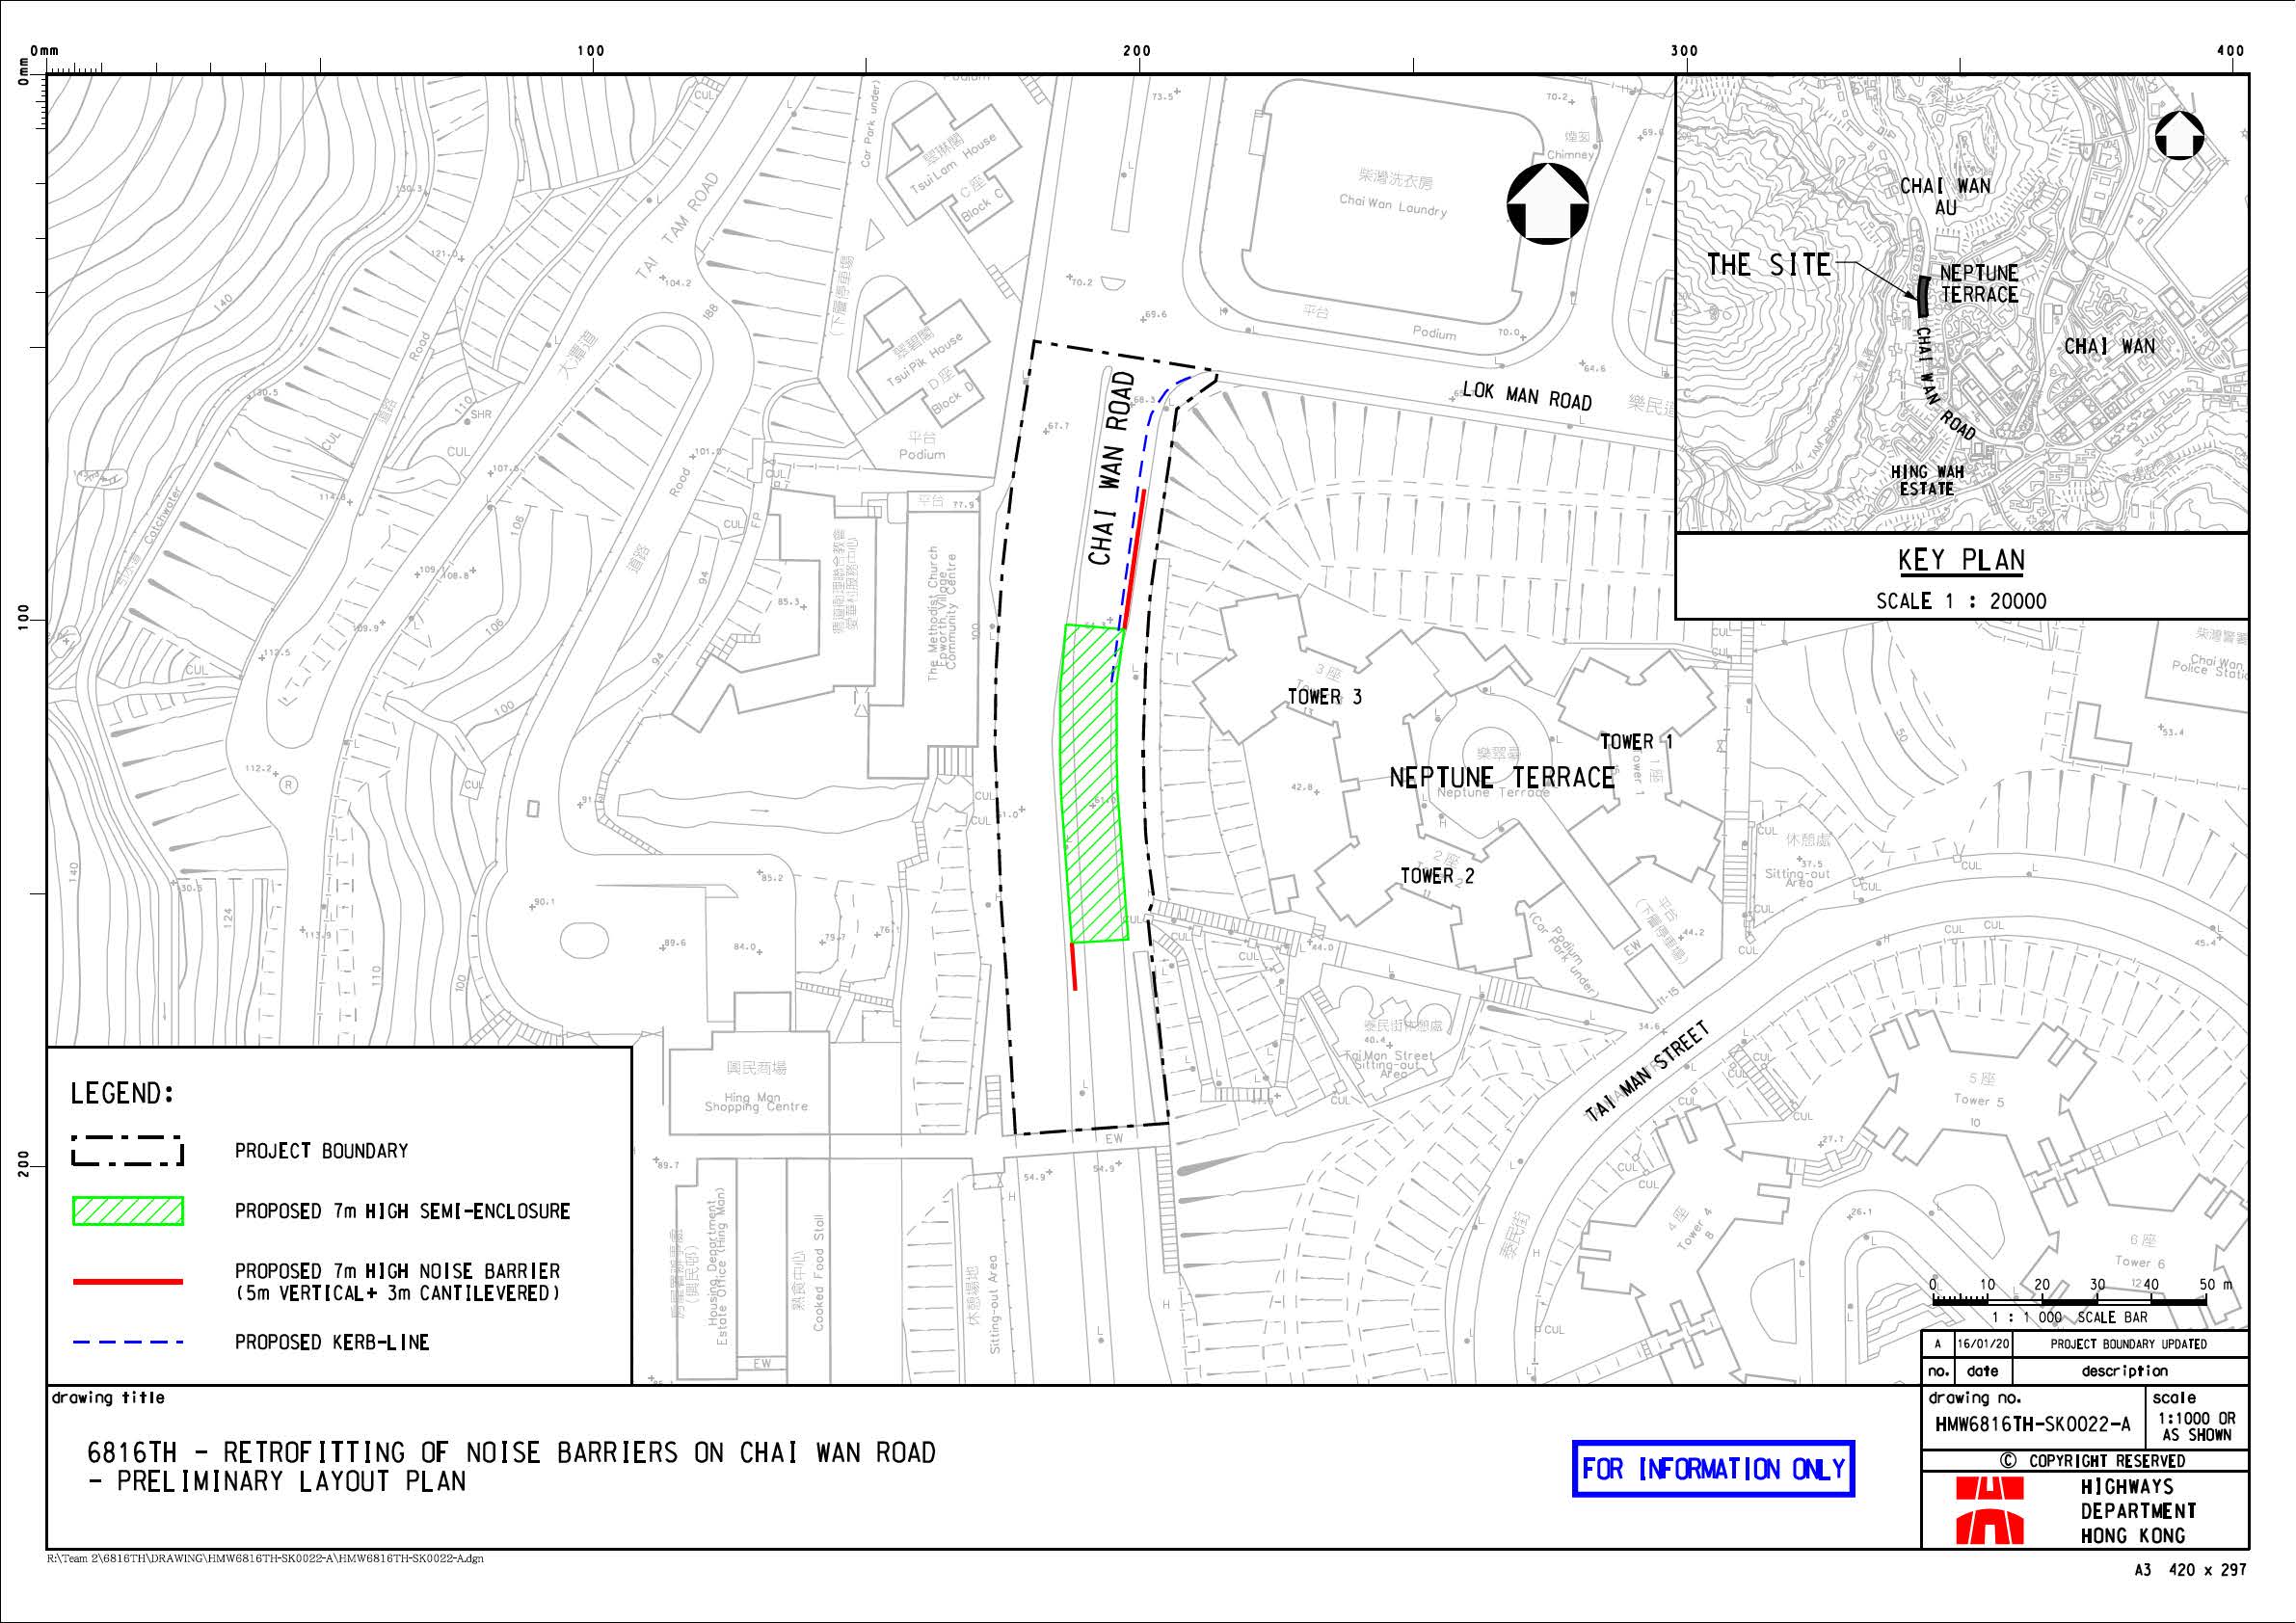 Layout Plan of Retrofitting of Noise Barriers on Chai Wan Road